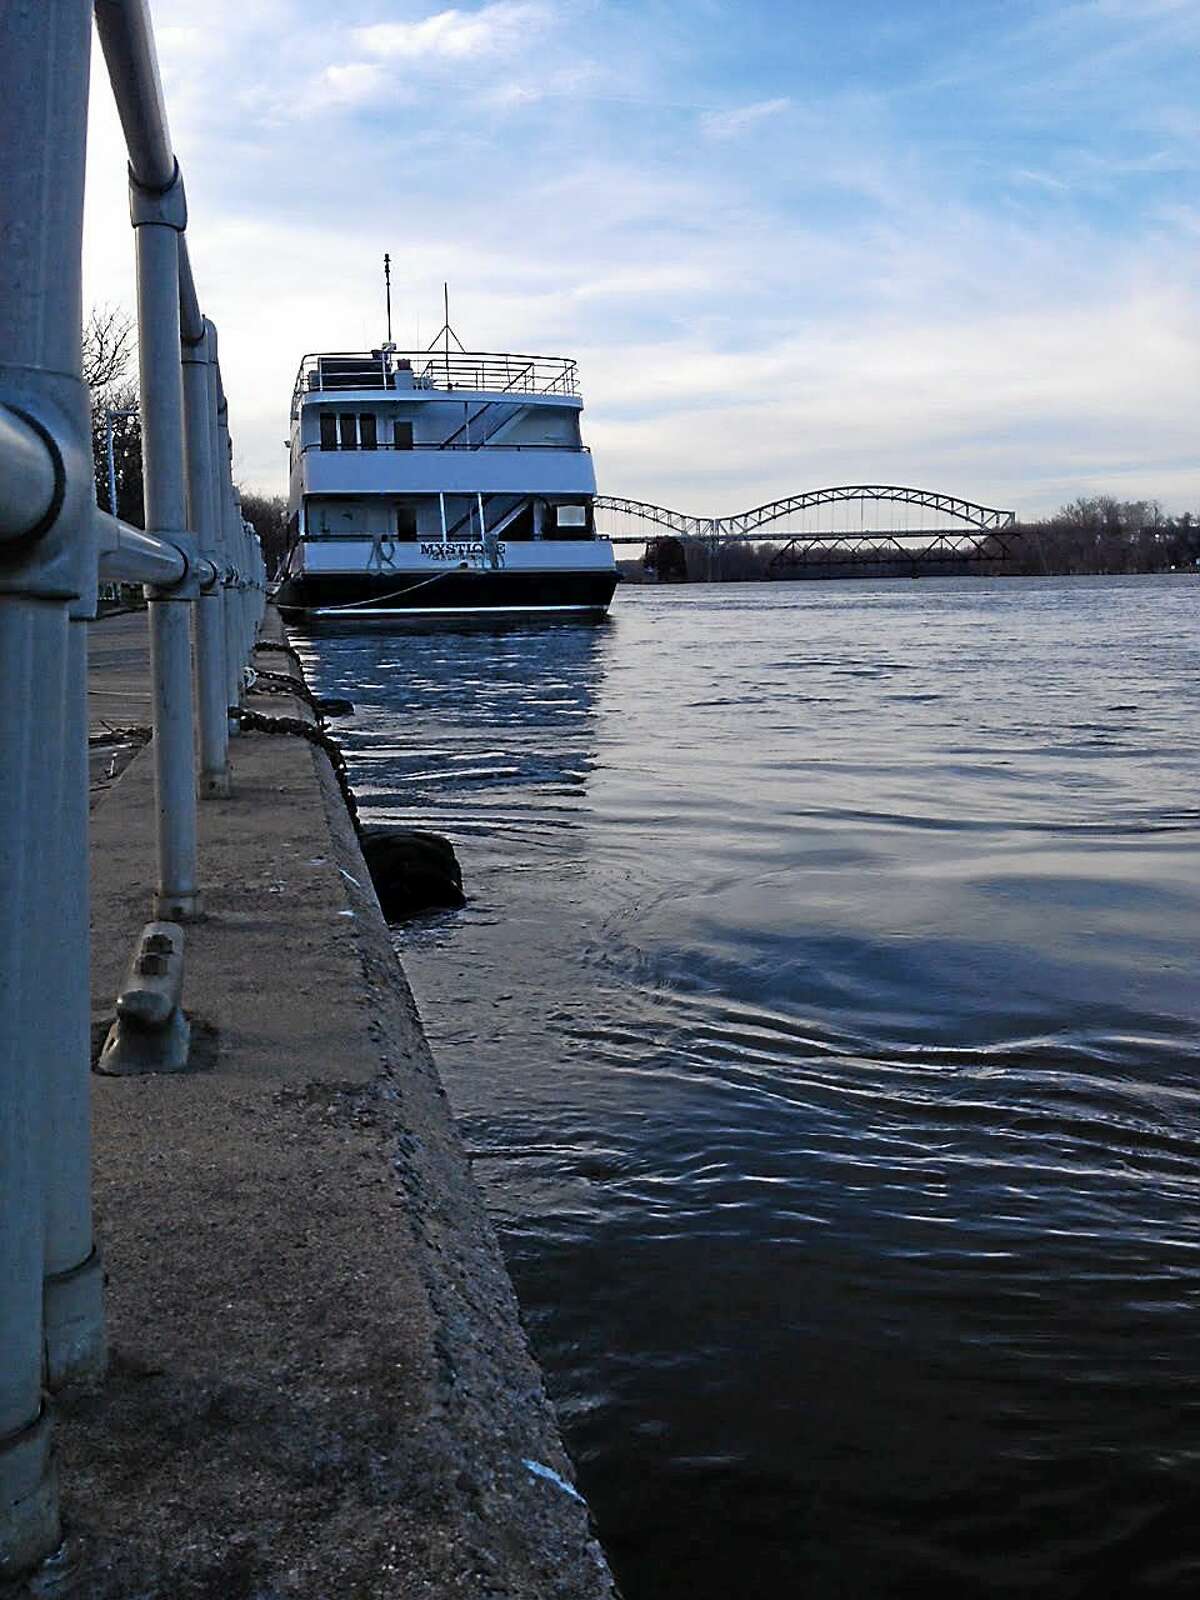 Last year, the State Bond Commission granted the city of Middletown $2.6 million to redevelop its portion of the Connecticut riverfront.